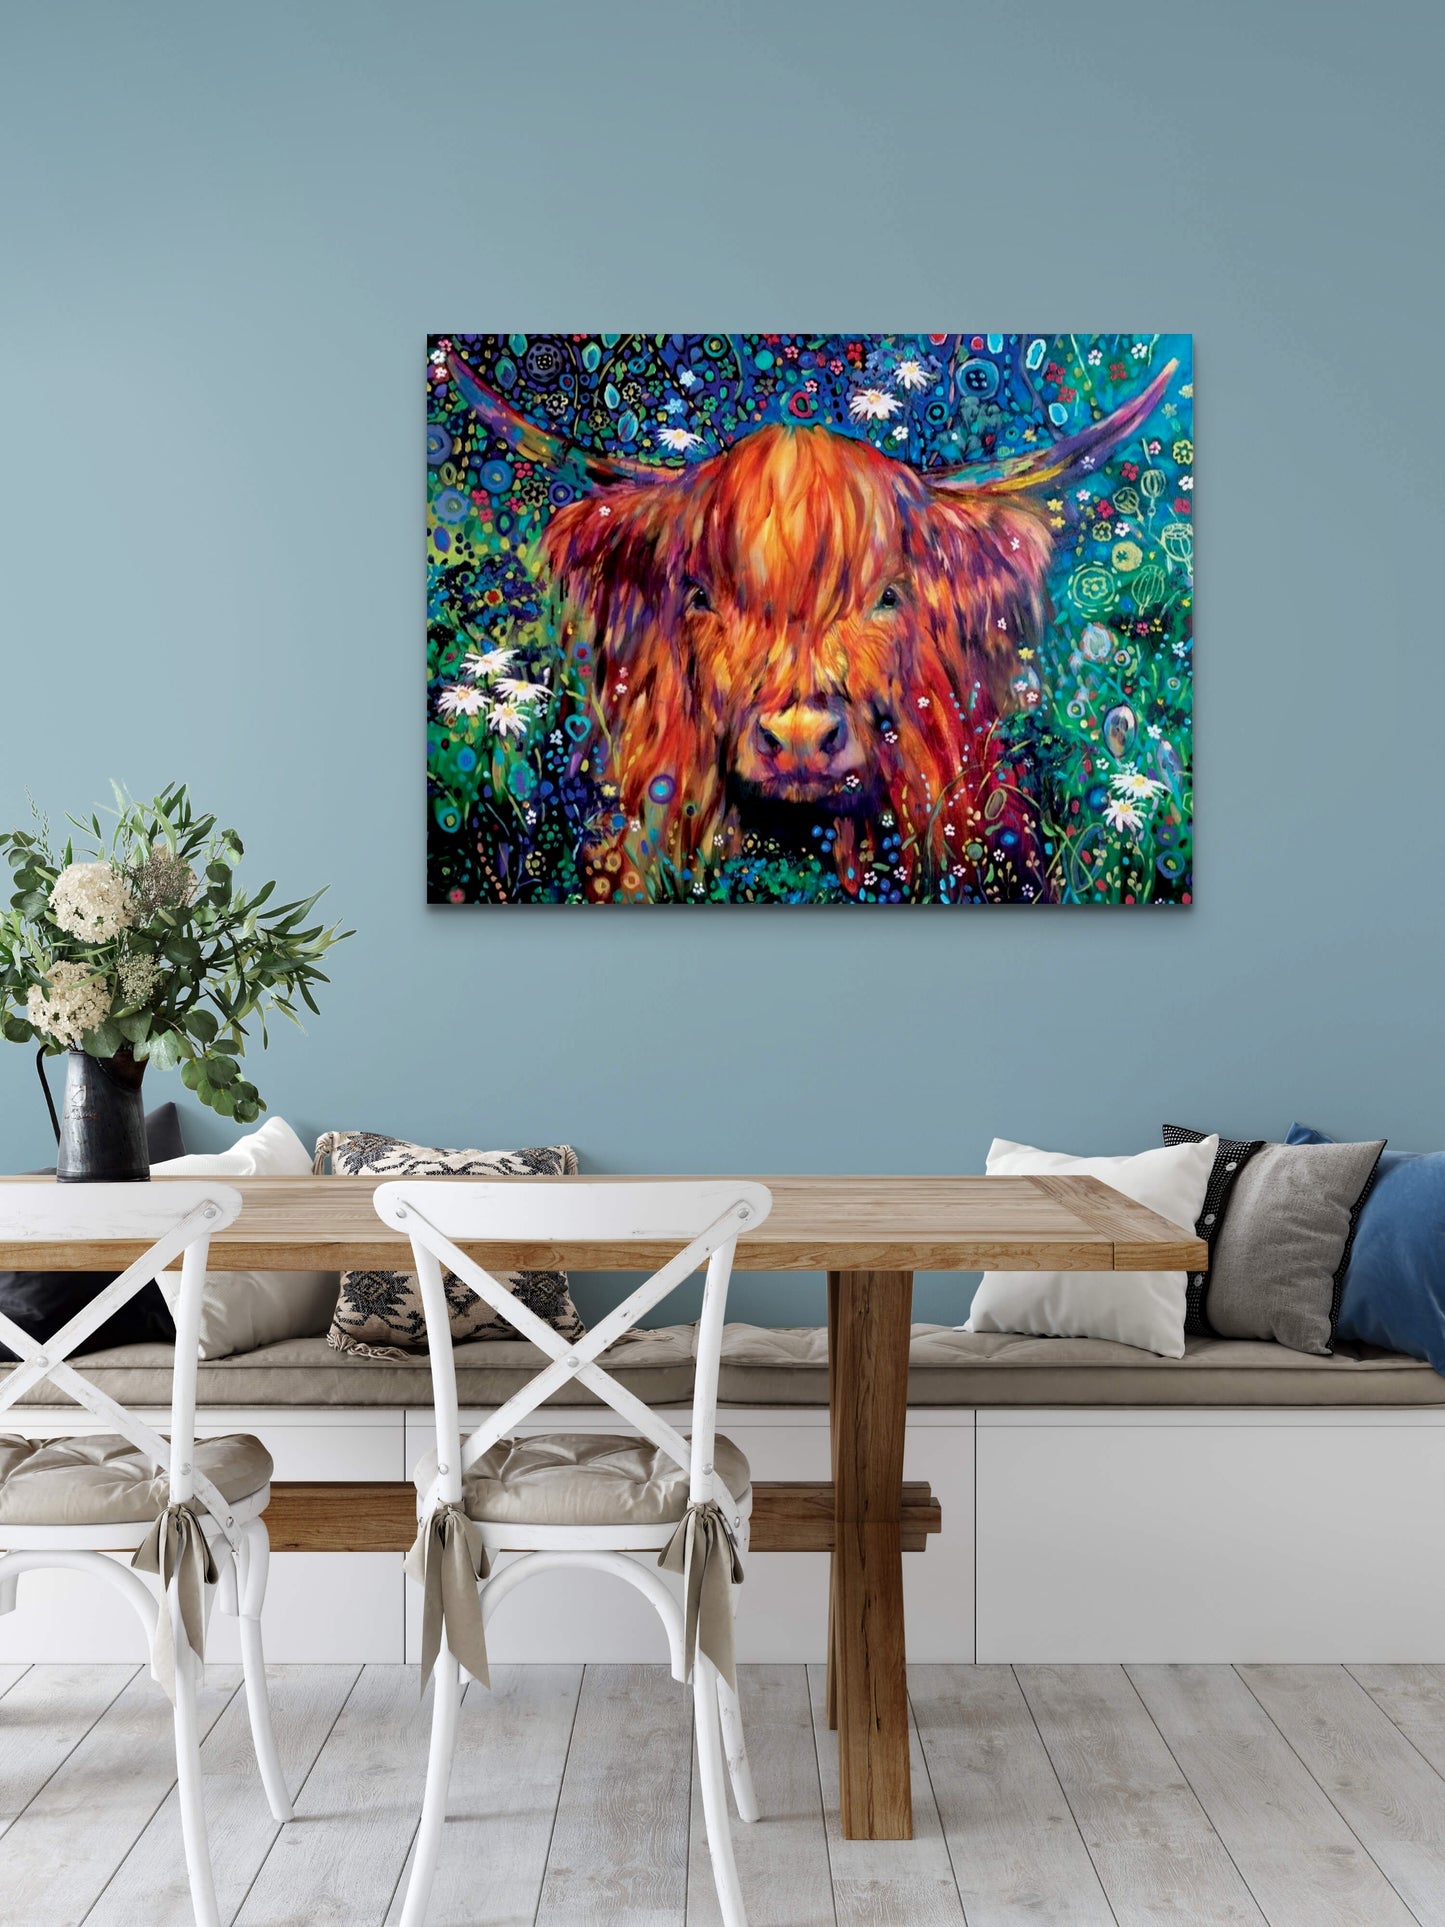 Highland Cow art with daisies by sue gardner